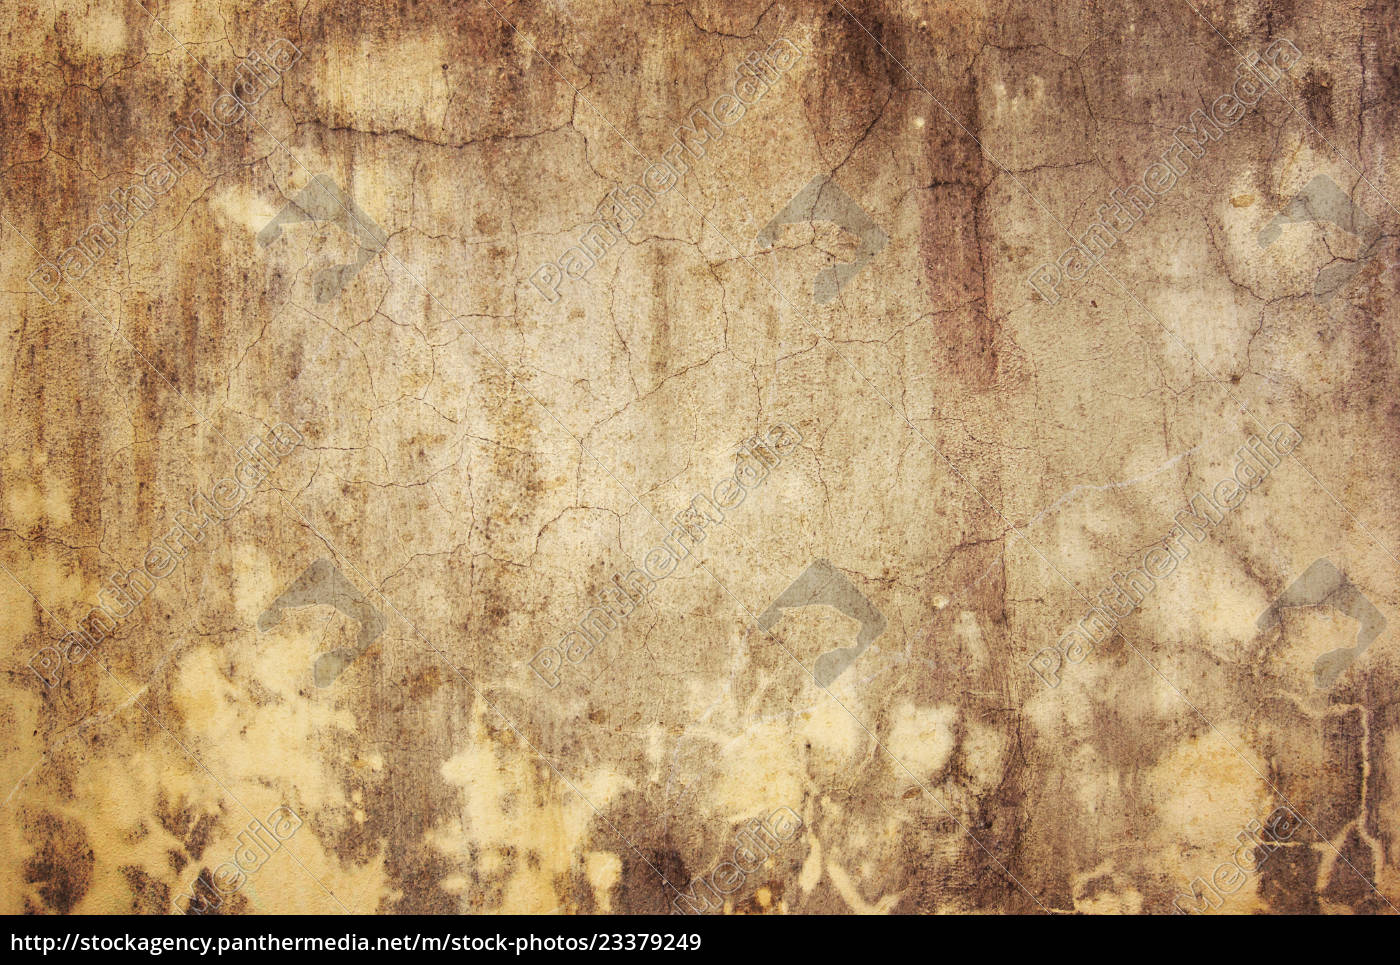  Vintage  texture  in grunge style Royalty free image 